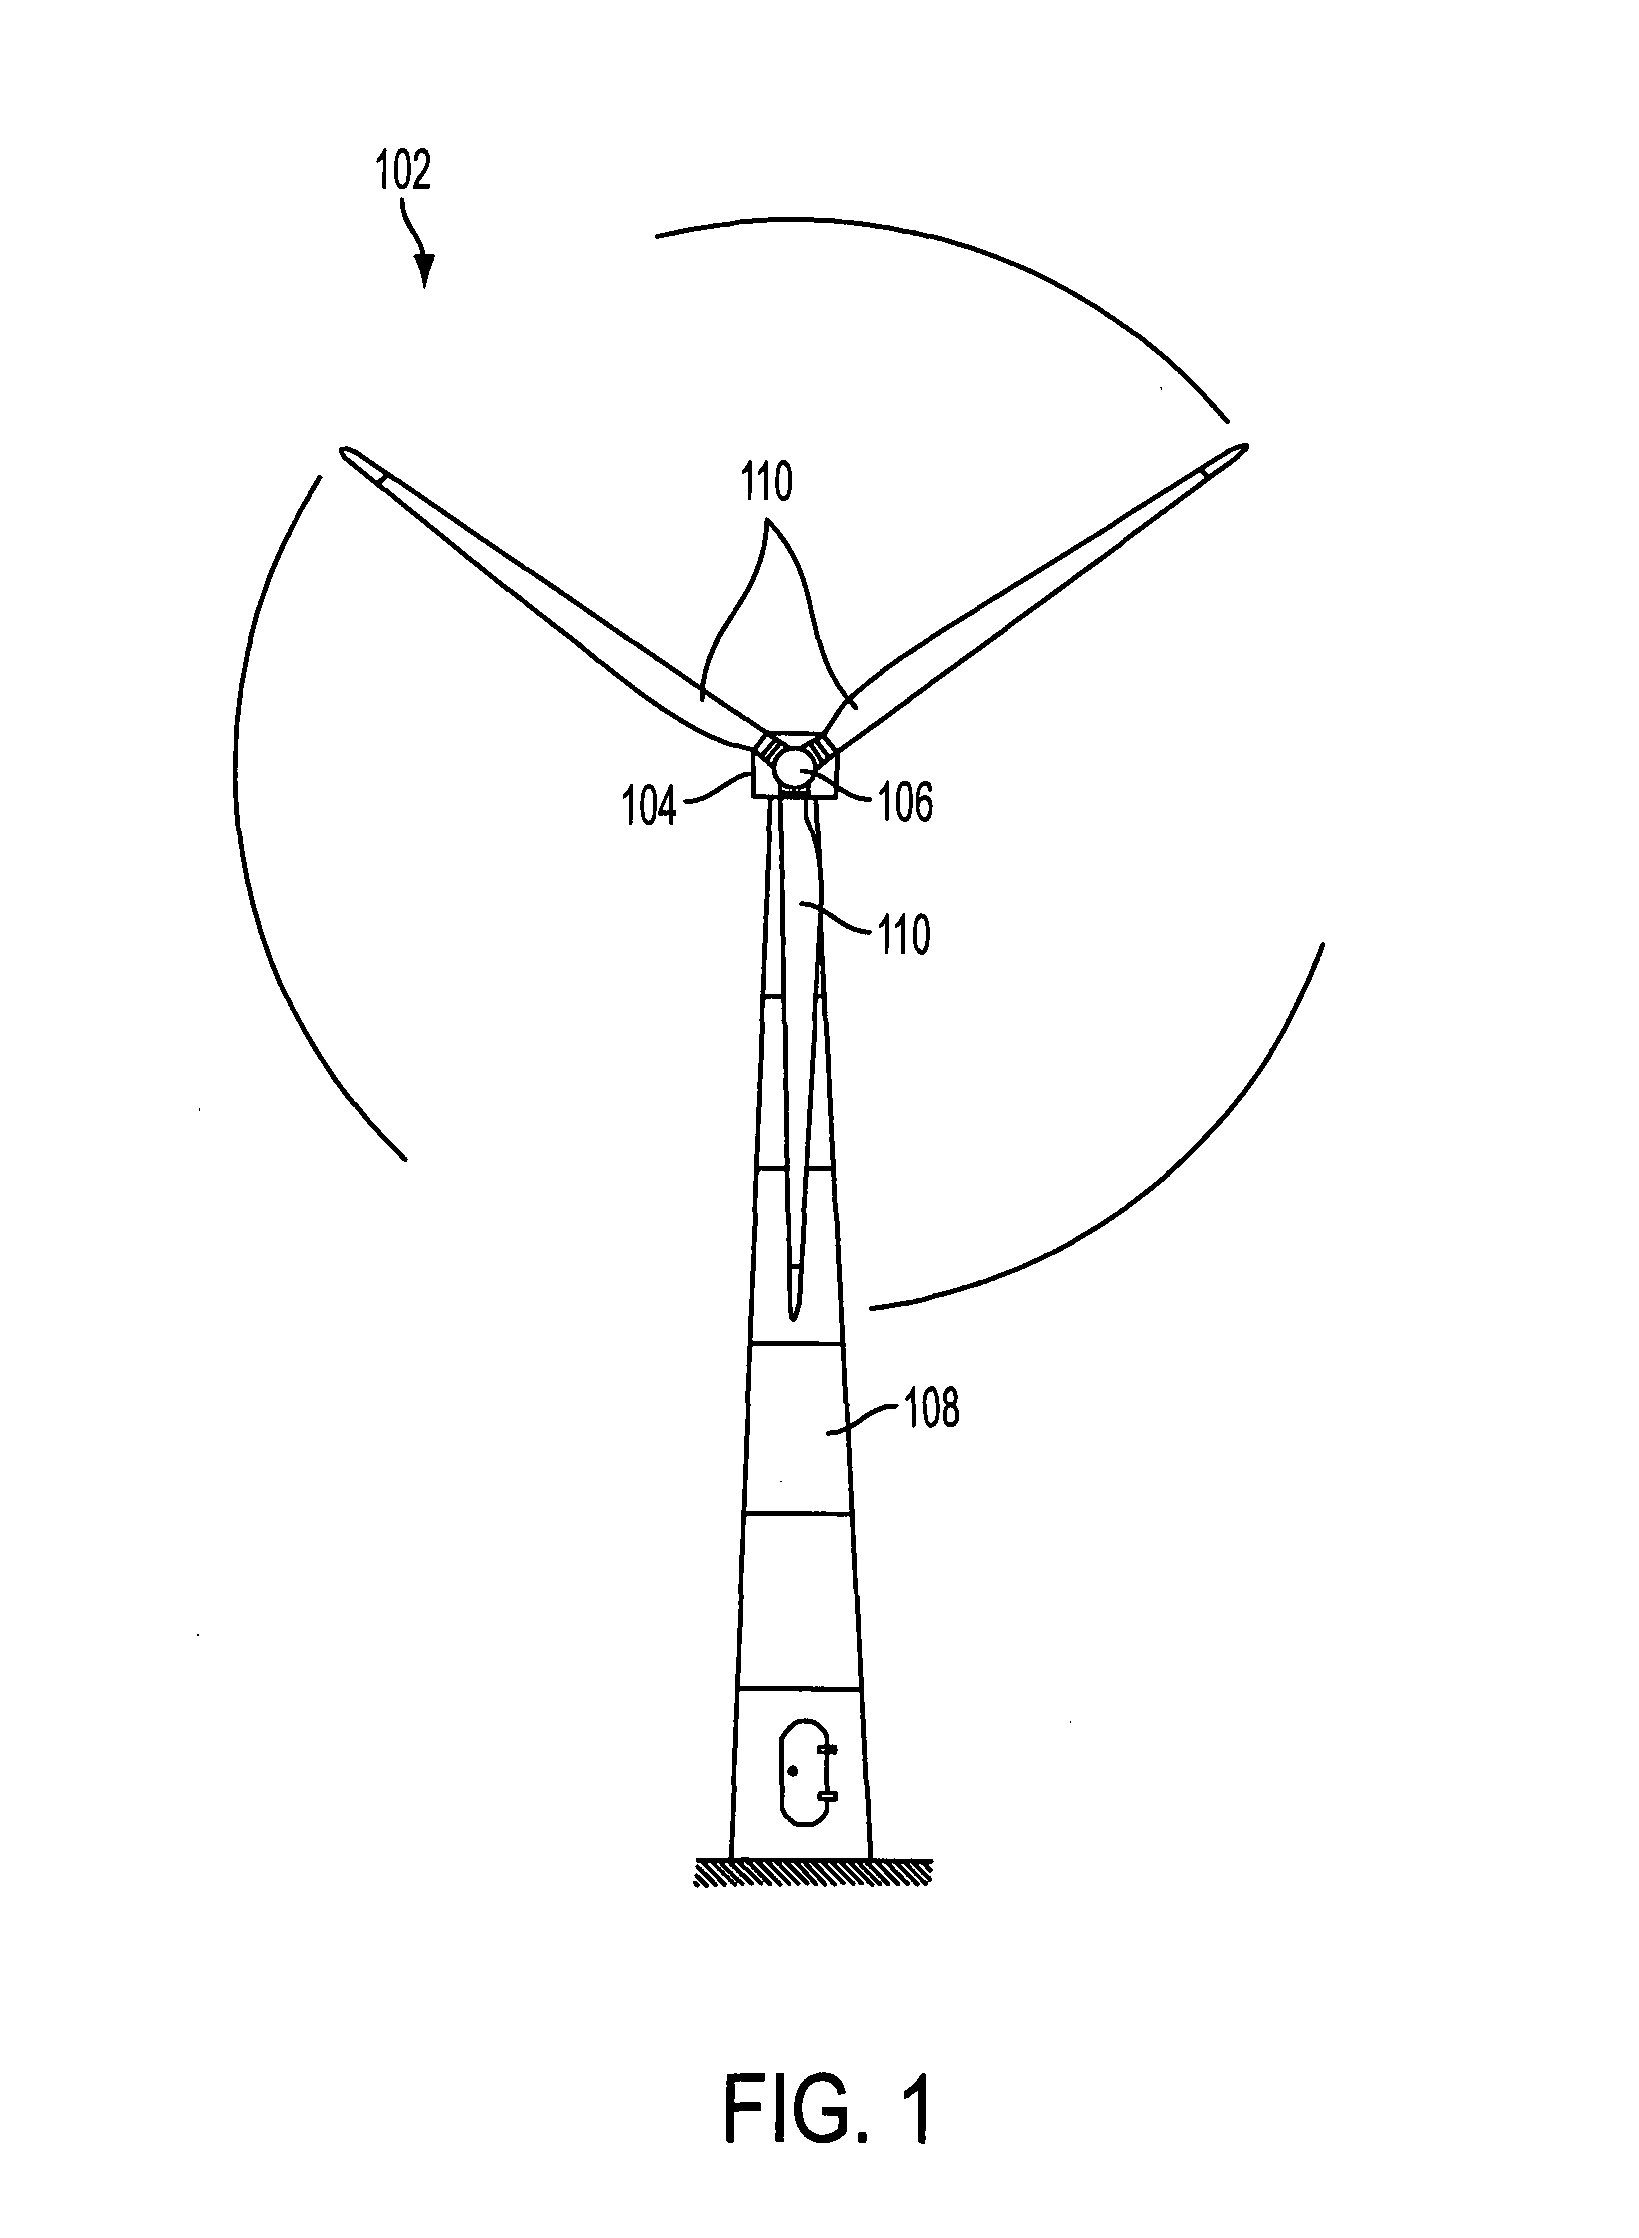 Operating a method for a wind turbine